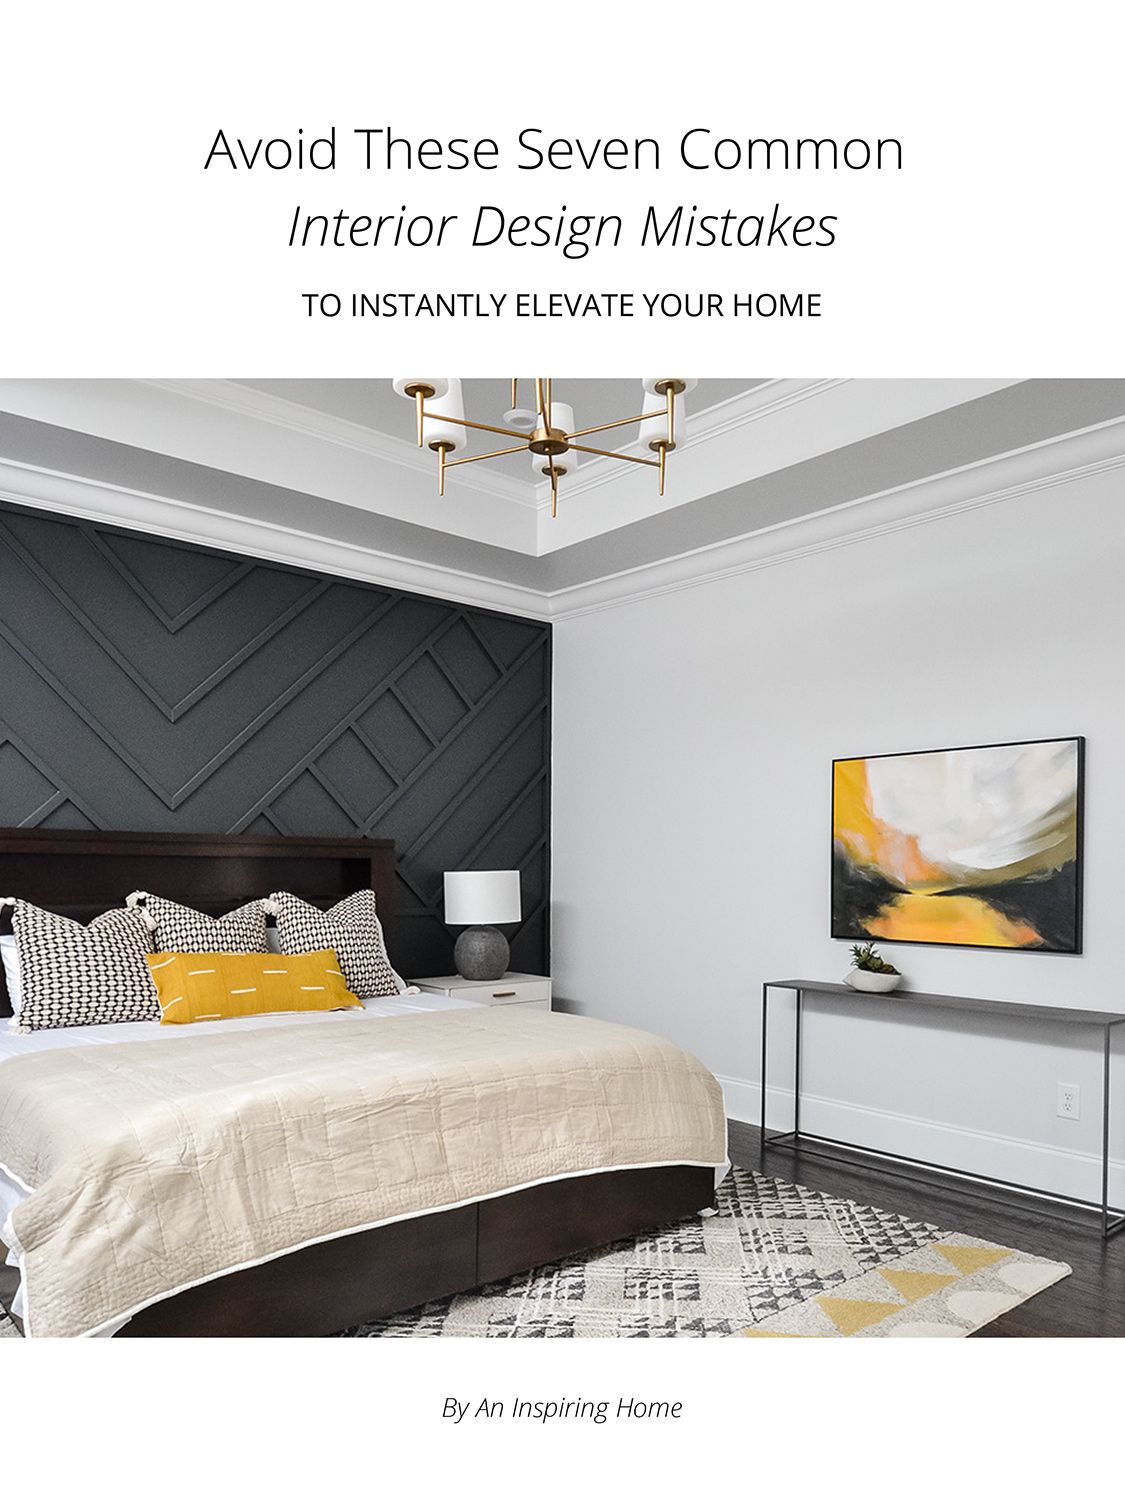 7 mistakes to avoid in interior design